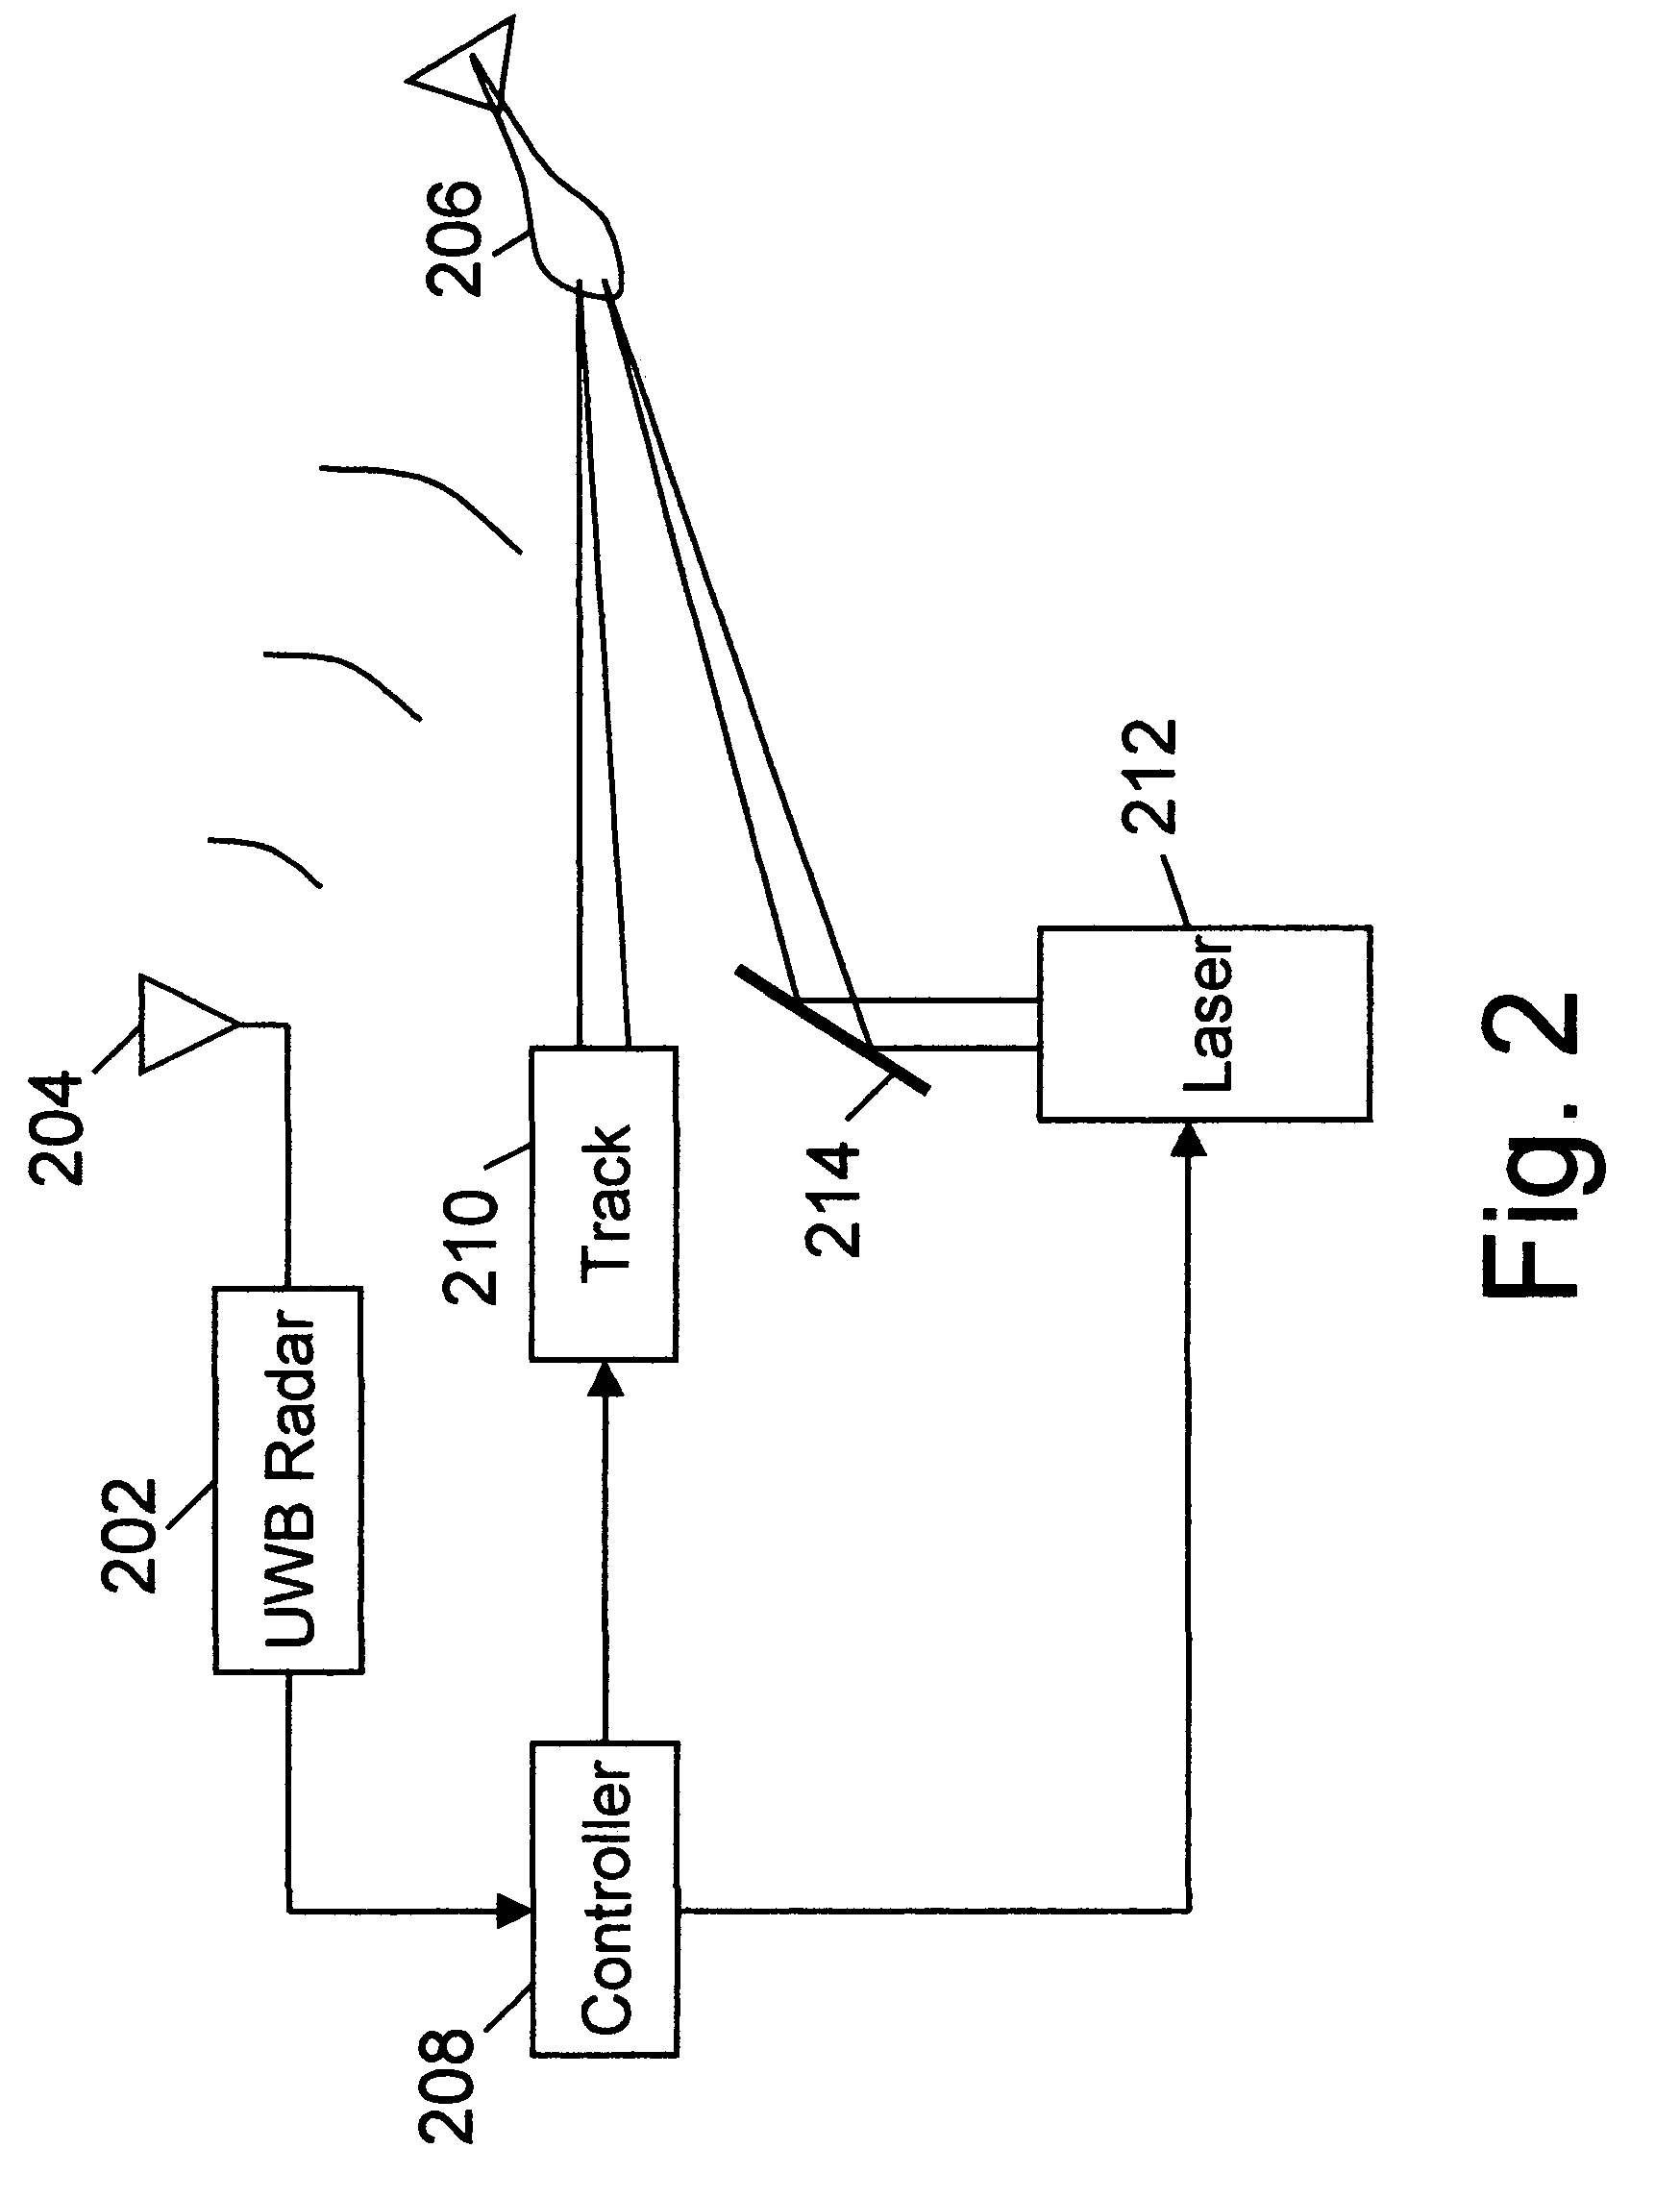 System and method for active protection of a resource